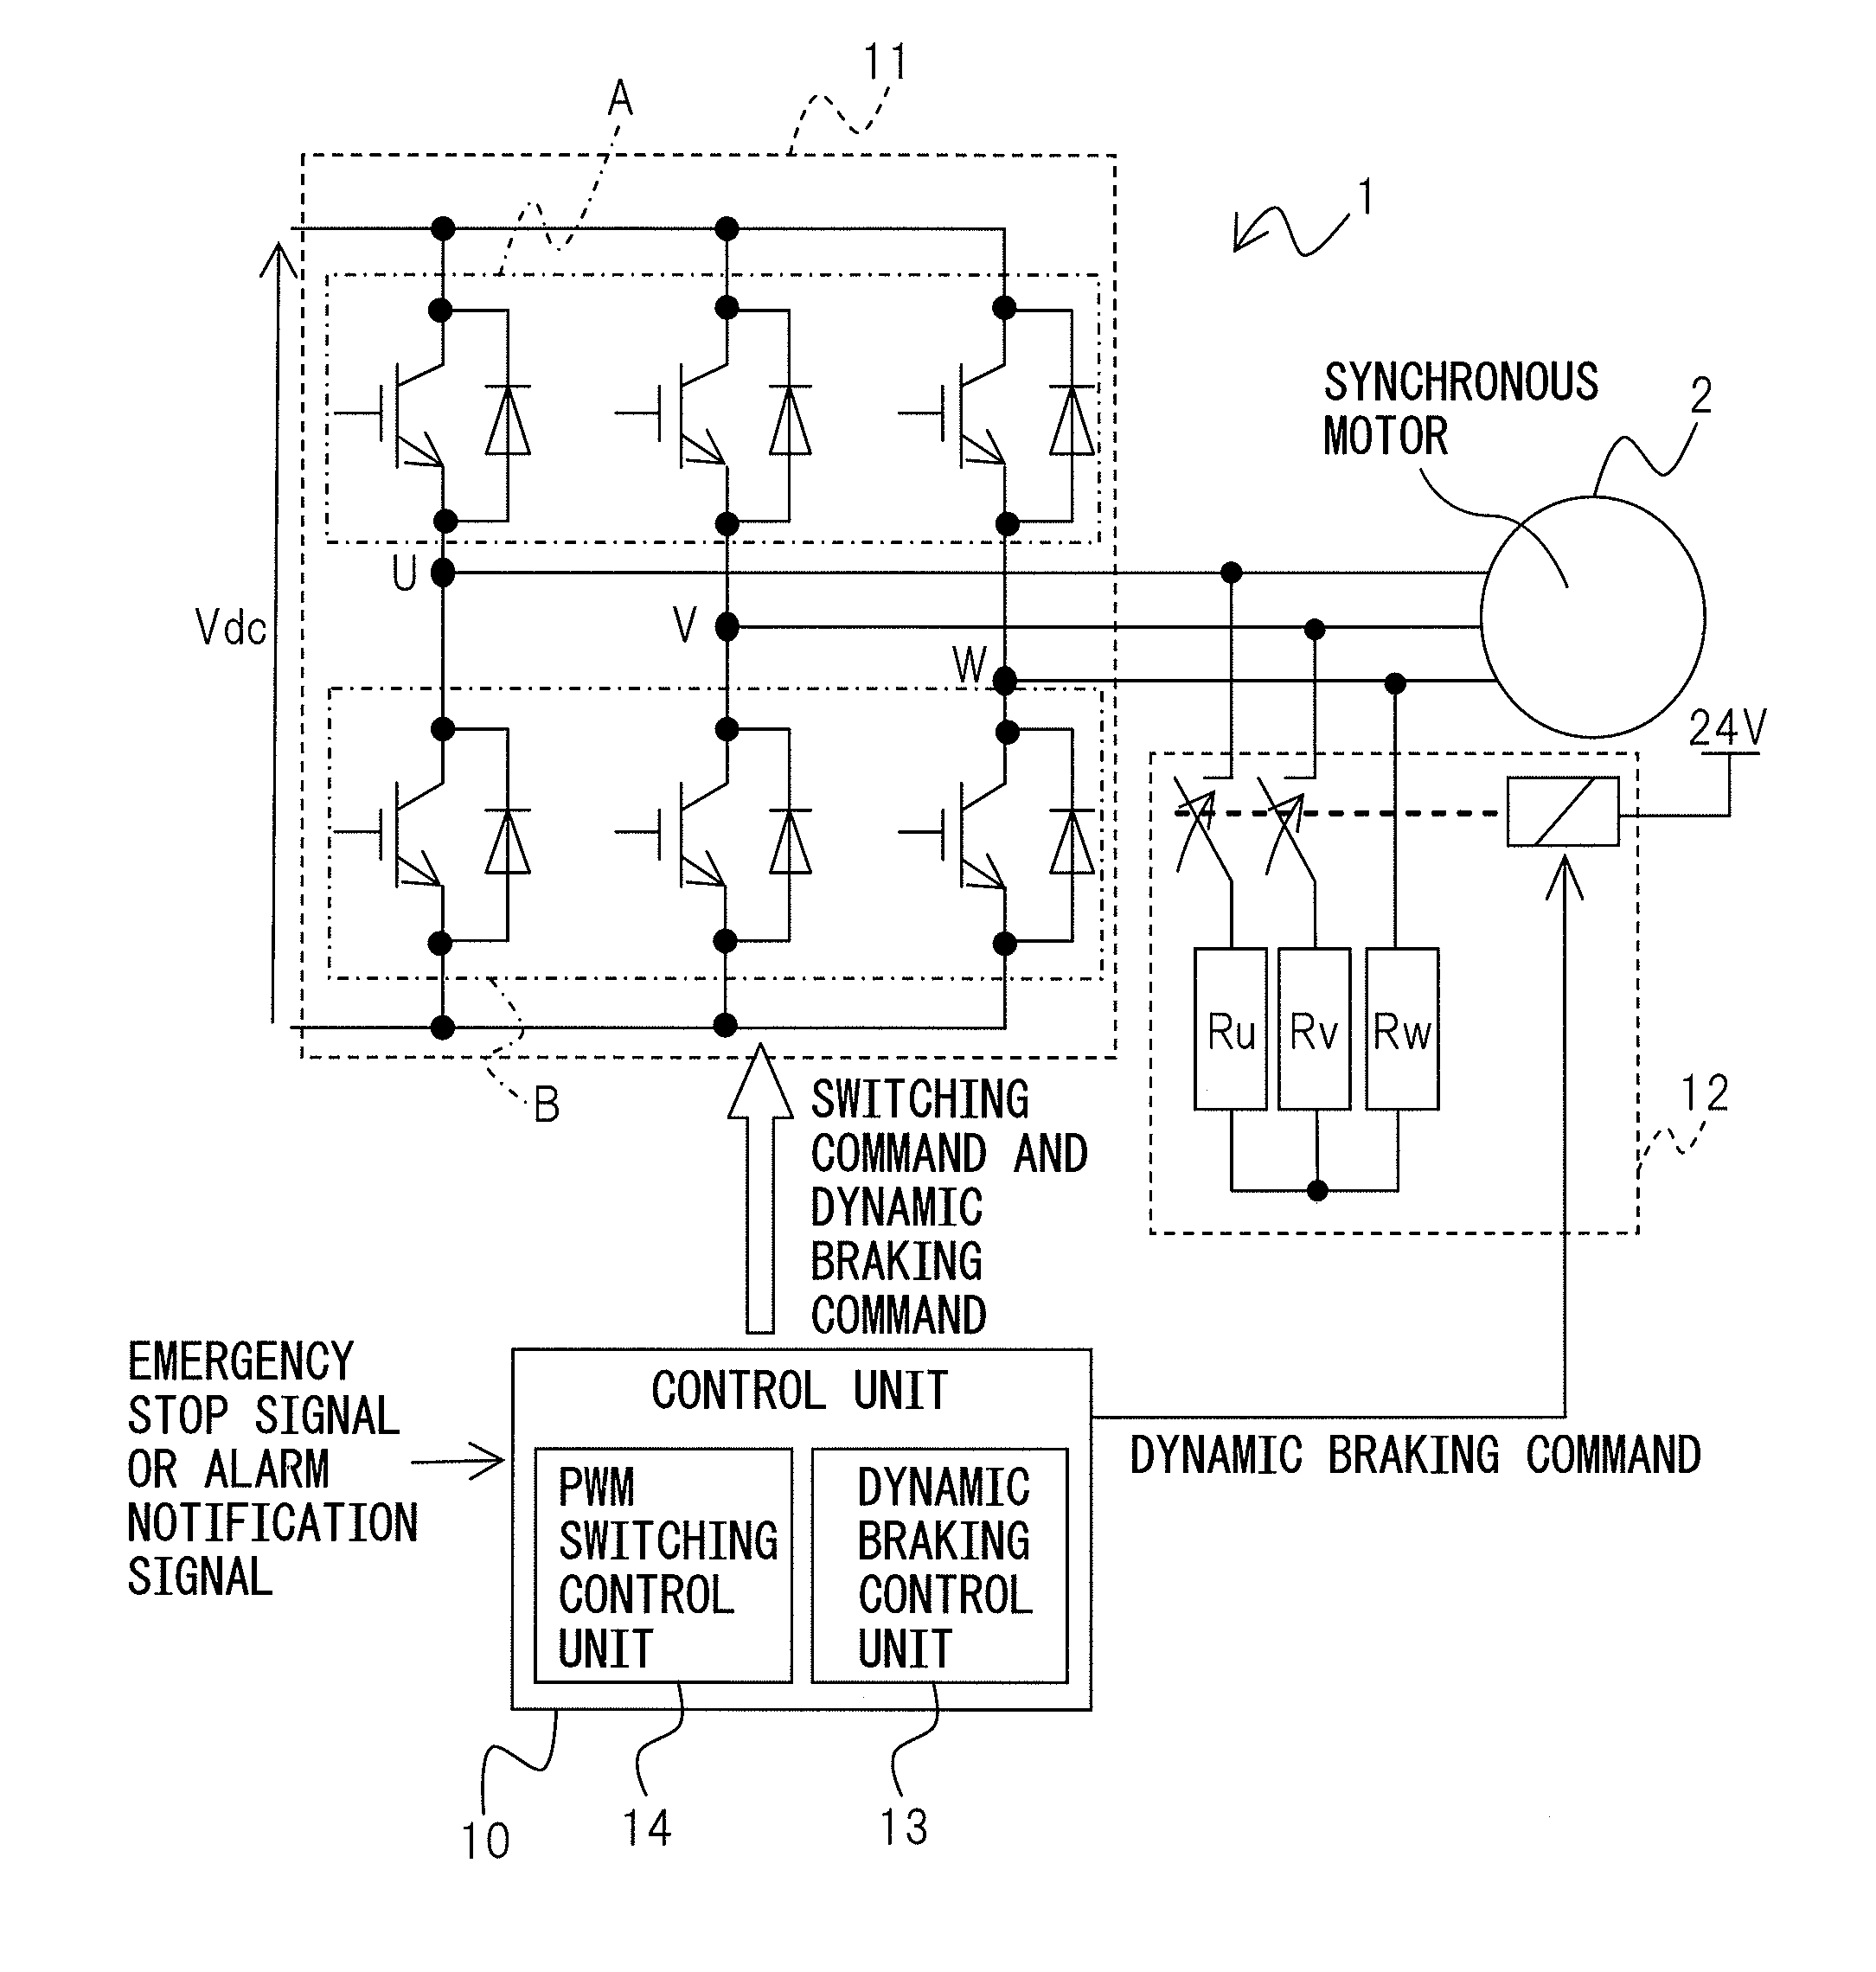 Motor drive apparatus equipped with dynamic braking control unit